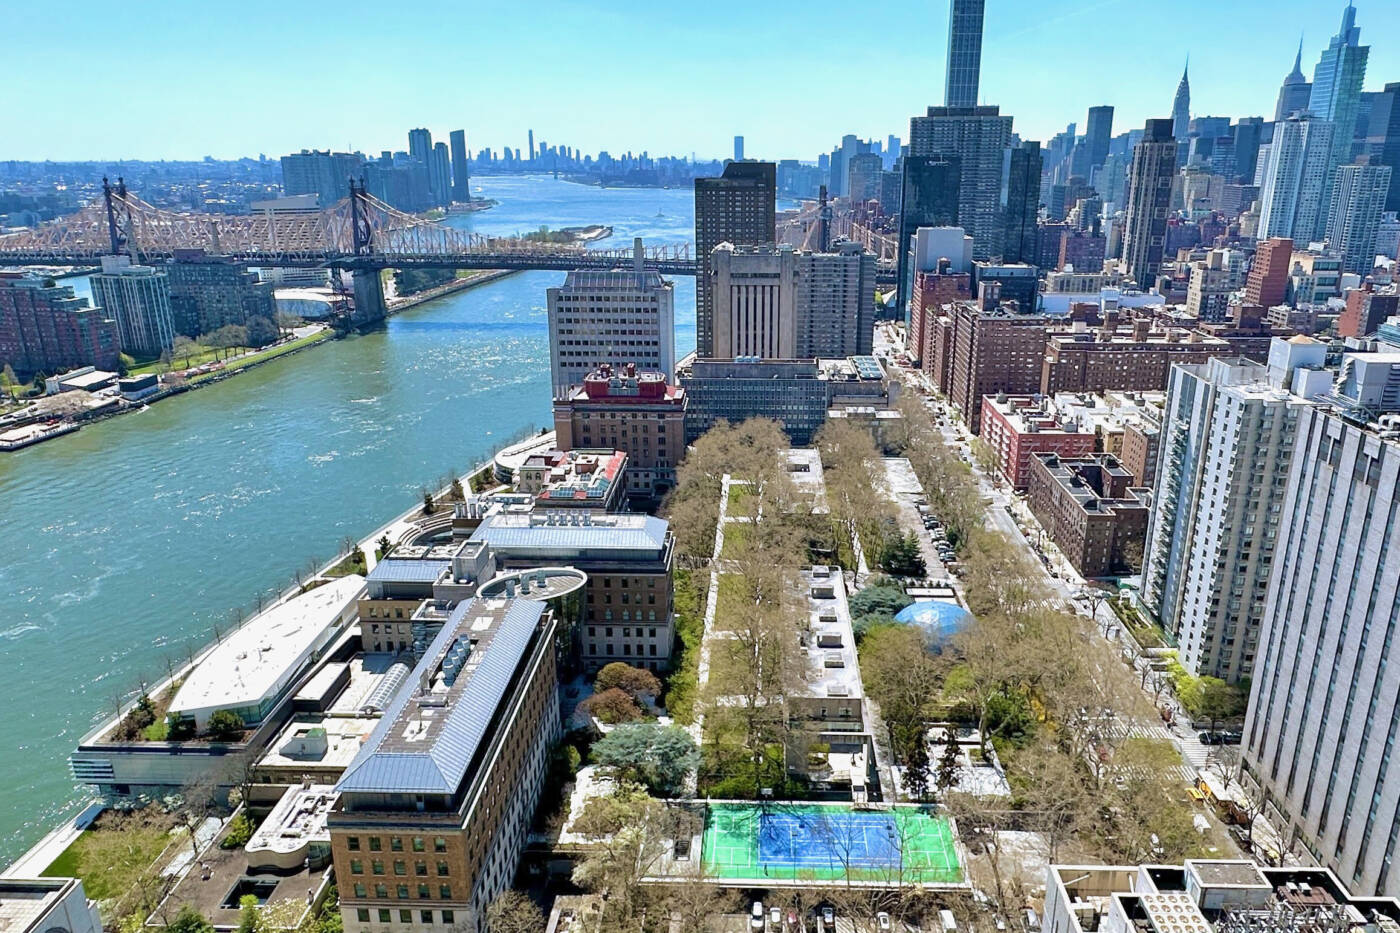 An aerial view of Rockefeller University campus